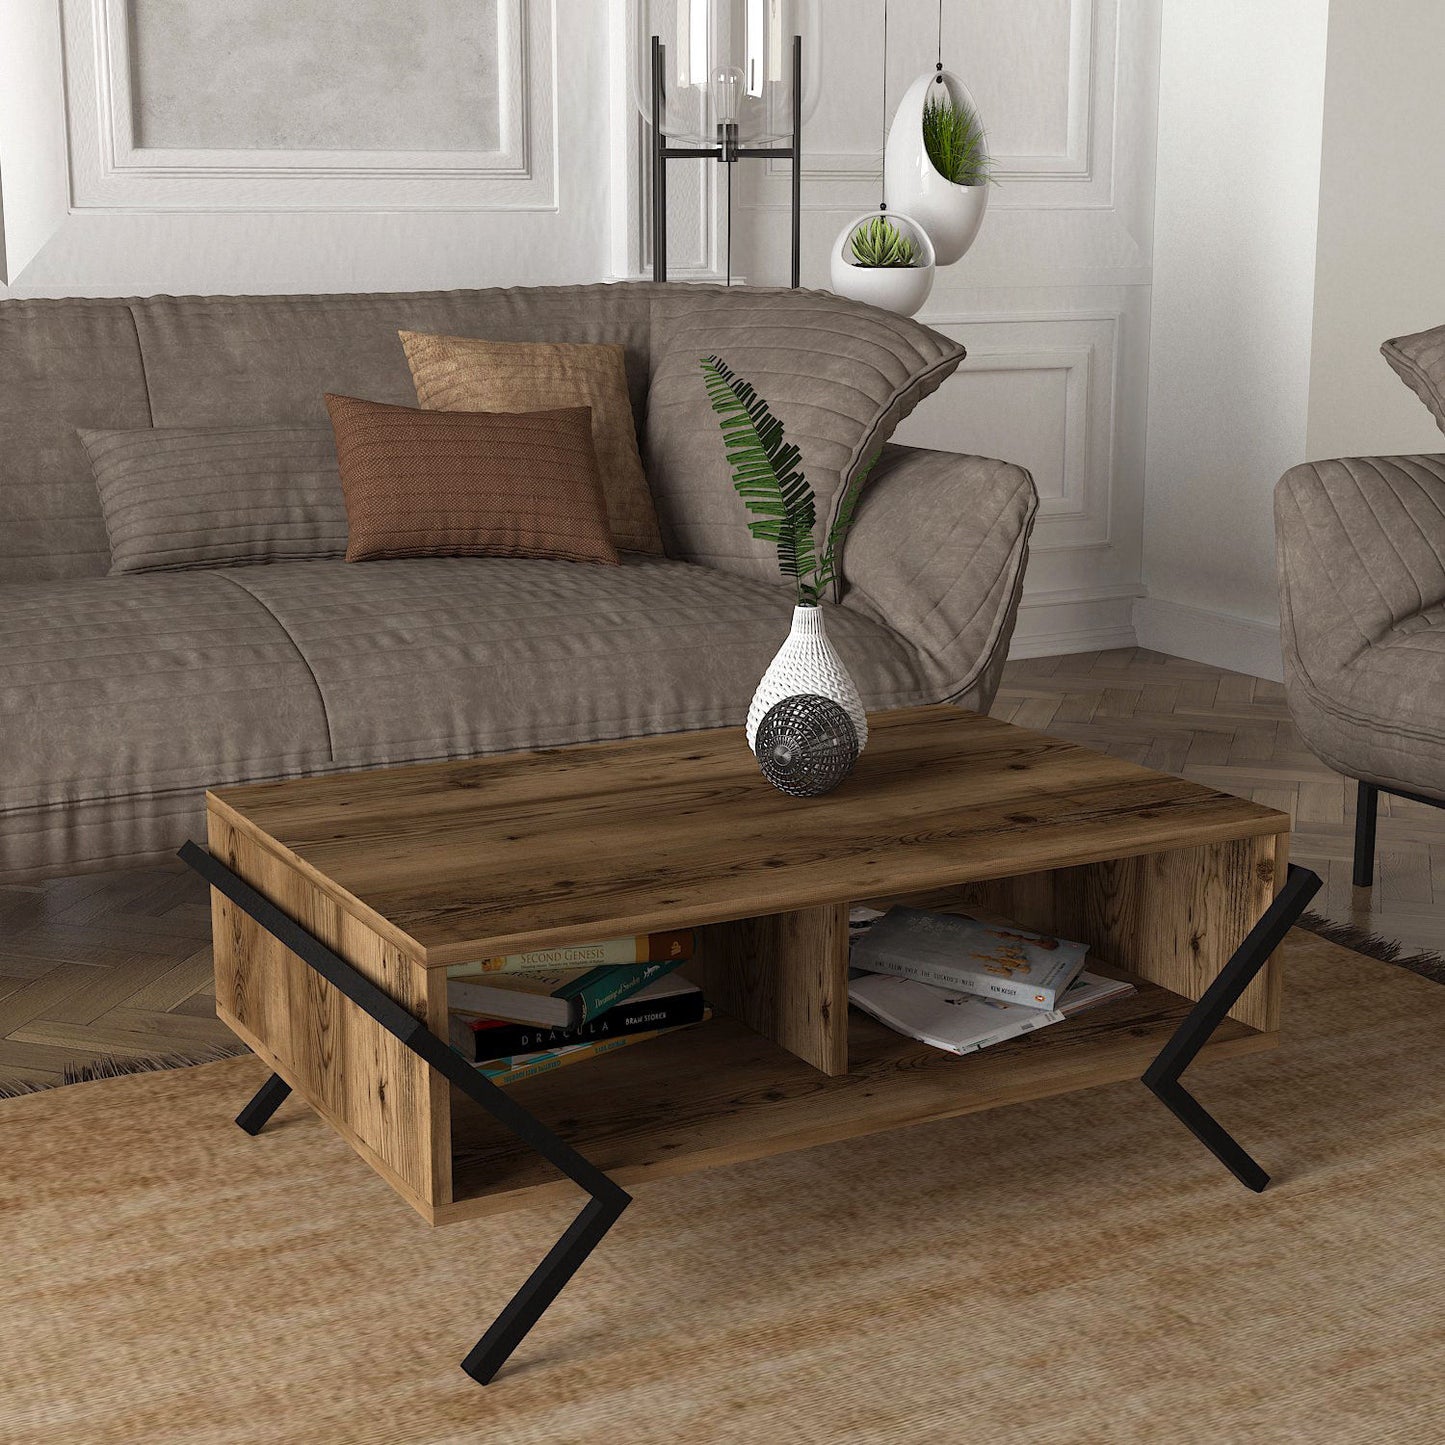 Prego - Coffee Table